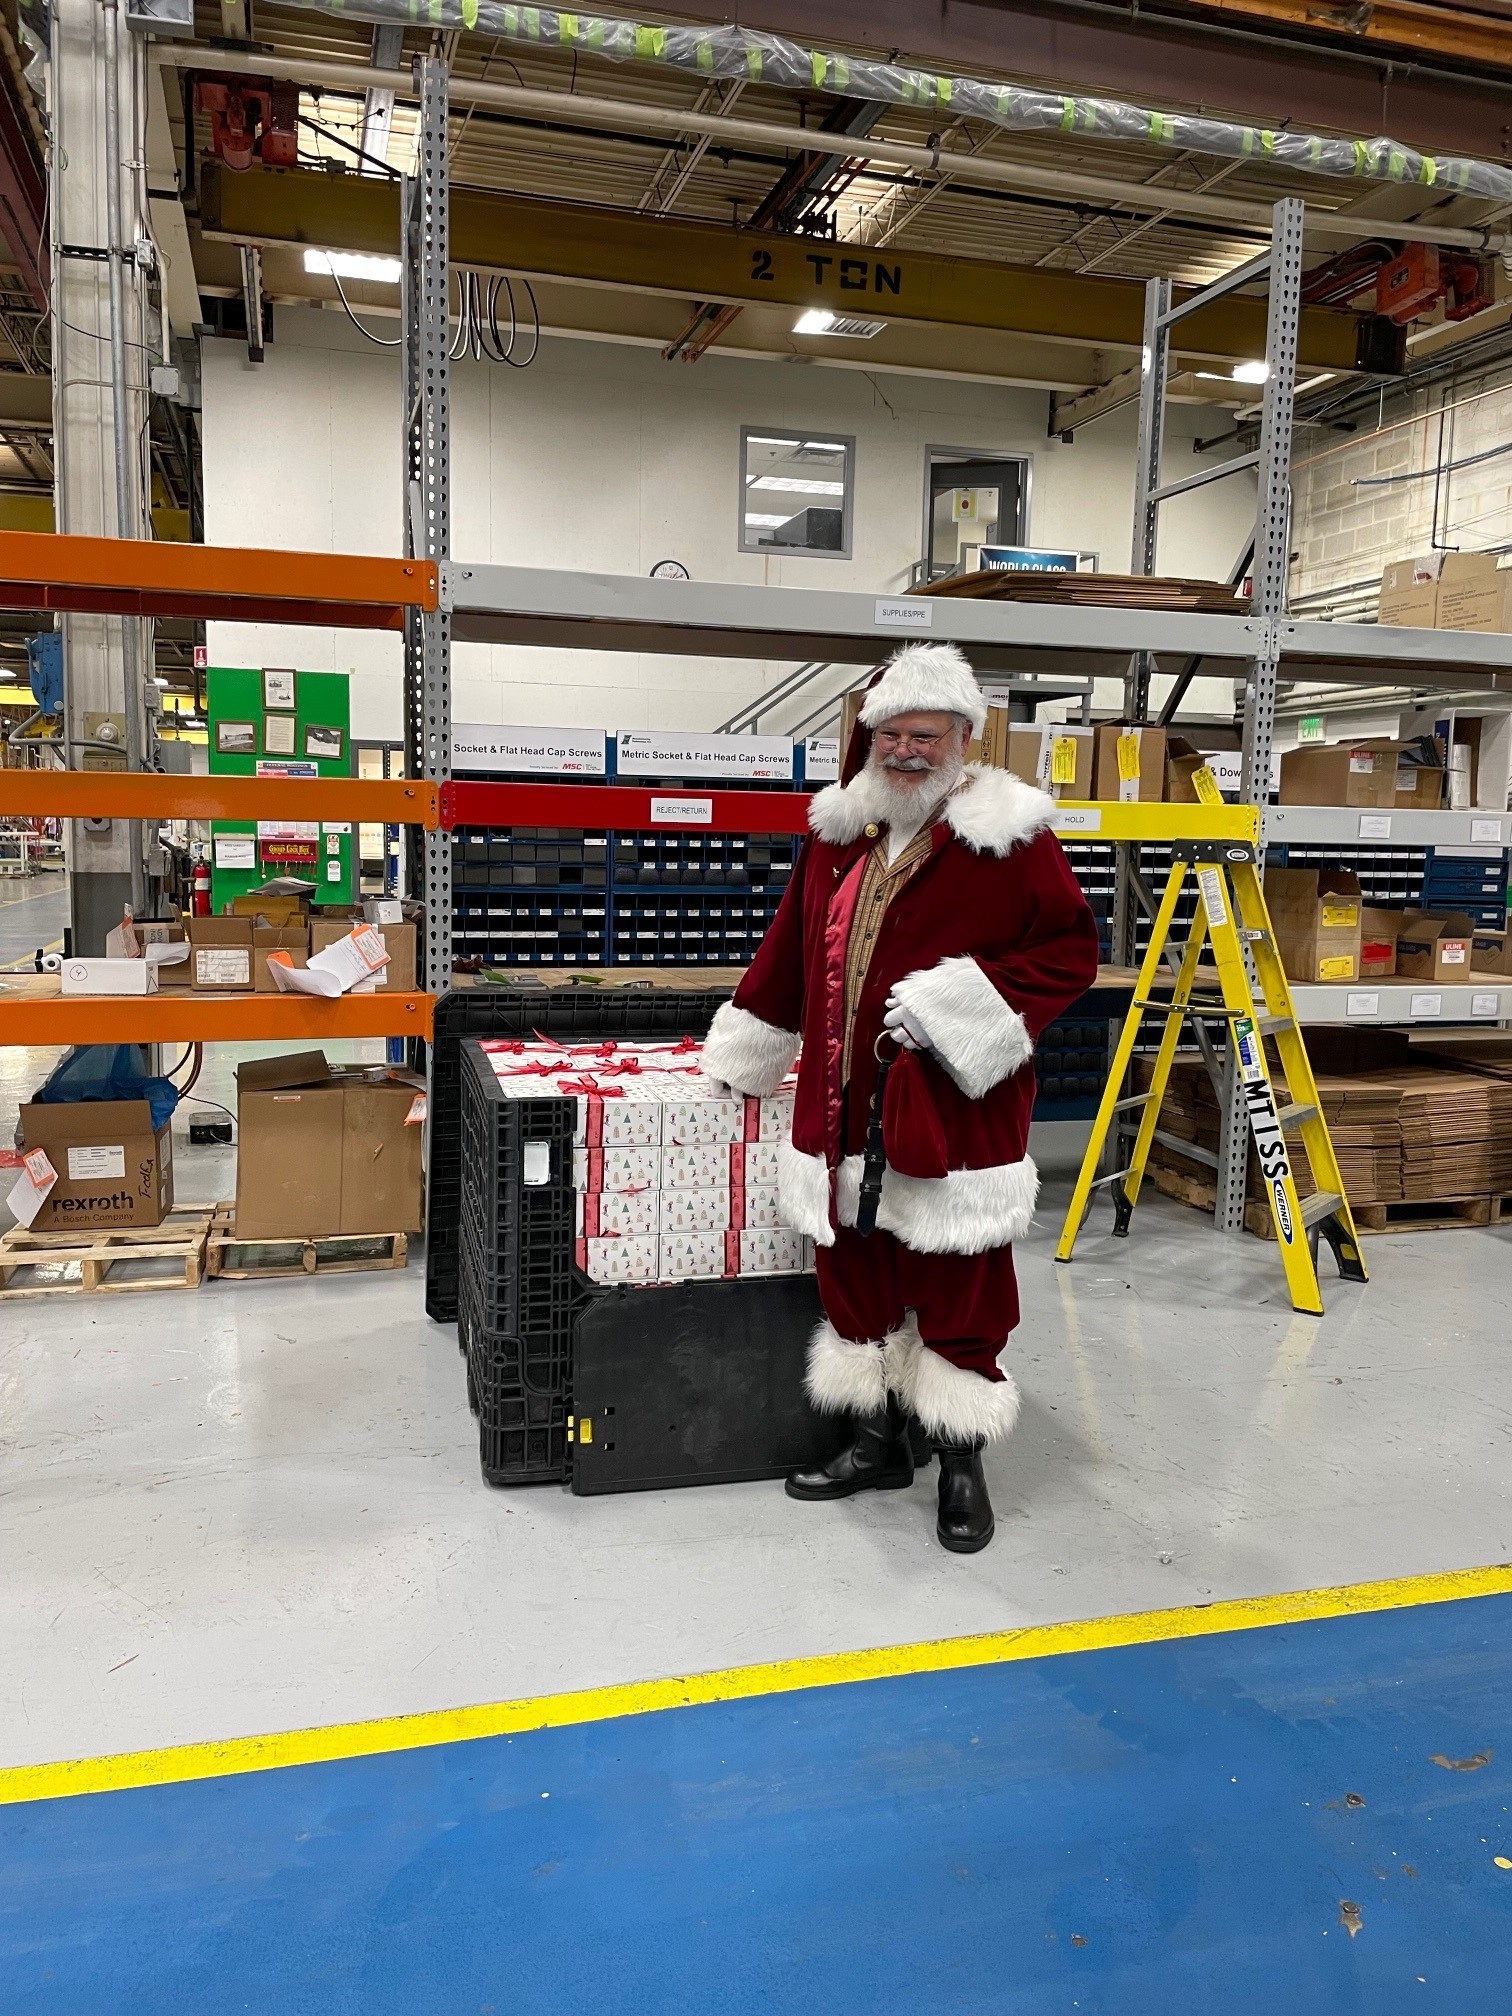 MTI's Ed Shorten poses as Santa in front of a pile of presents